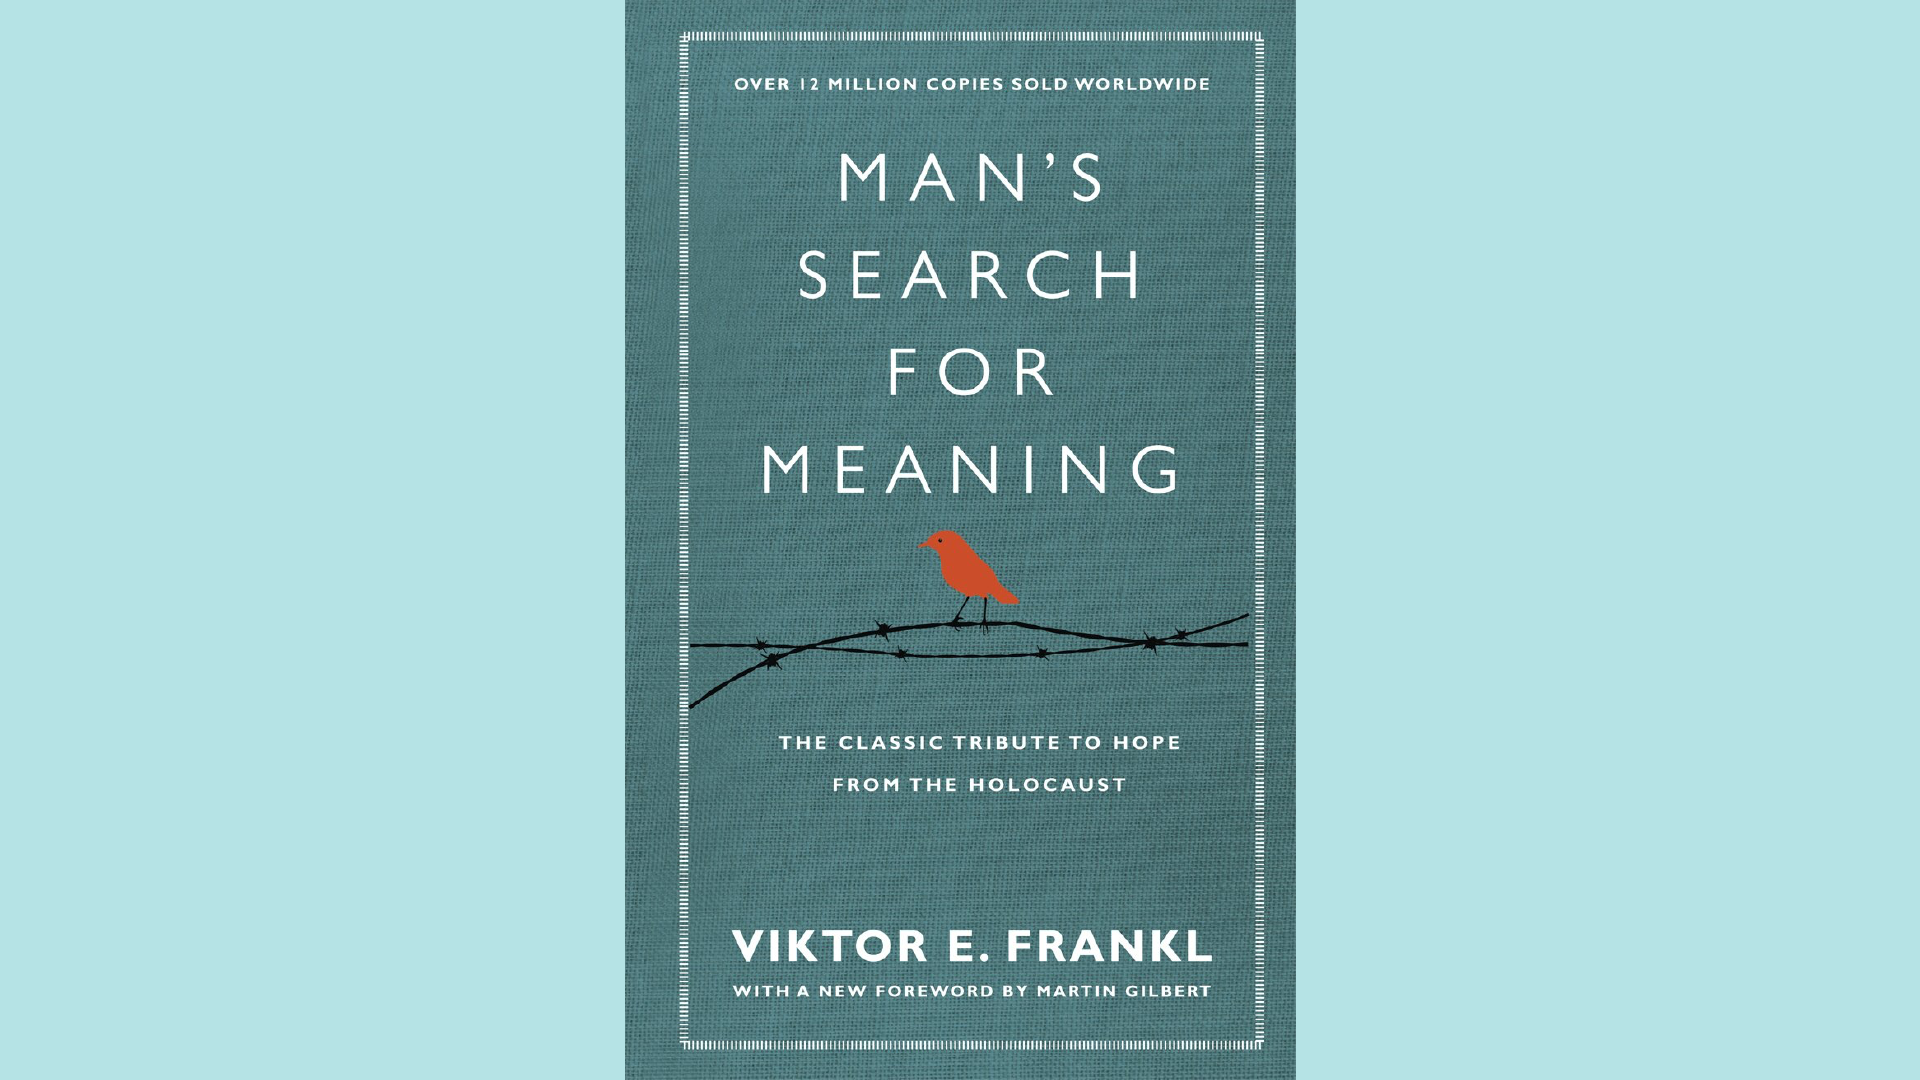 Summary: Man’s Search for Meaning by Viktor Frankl